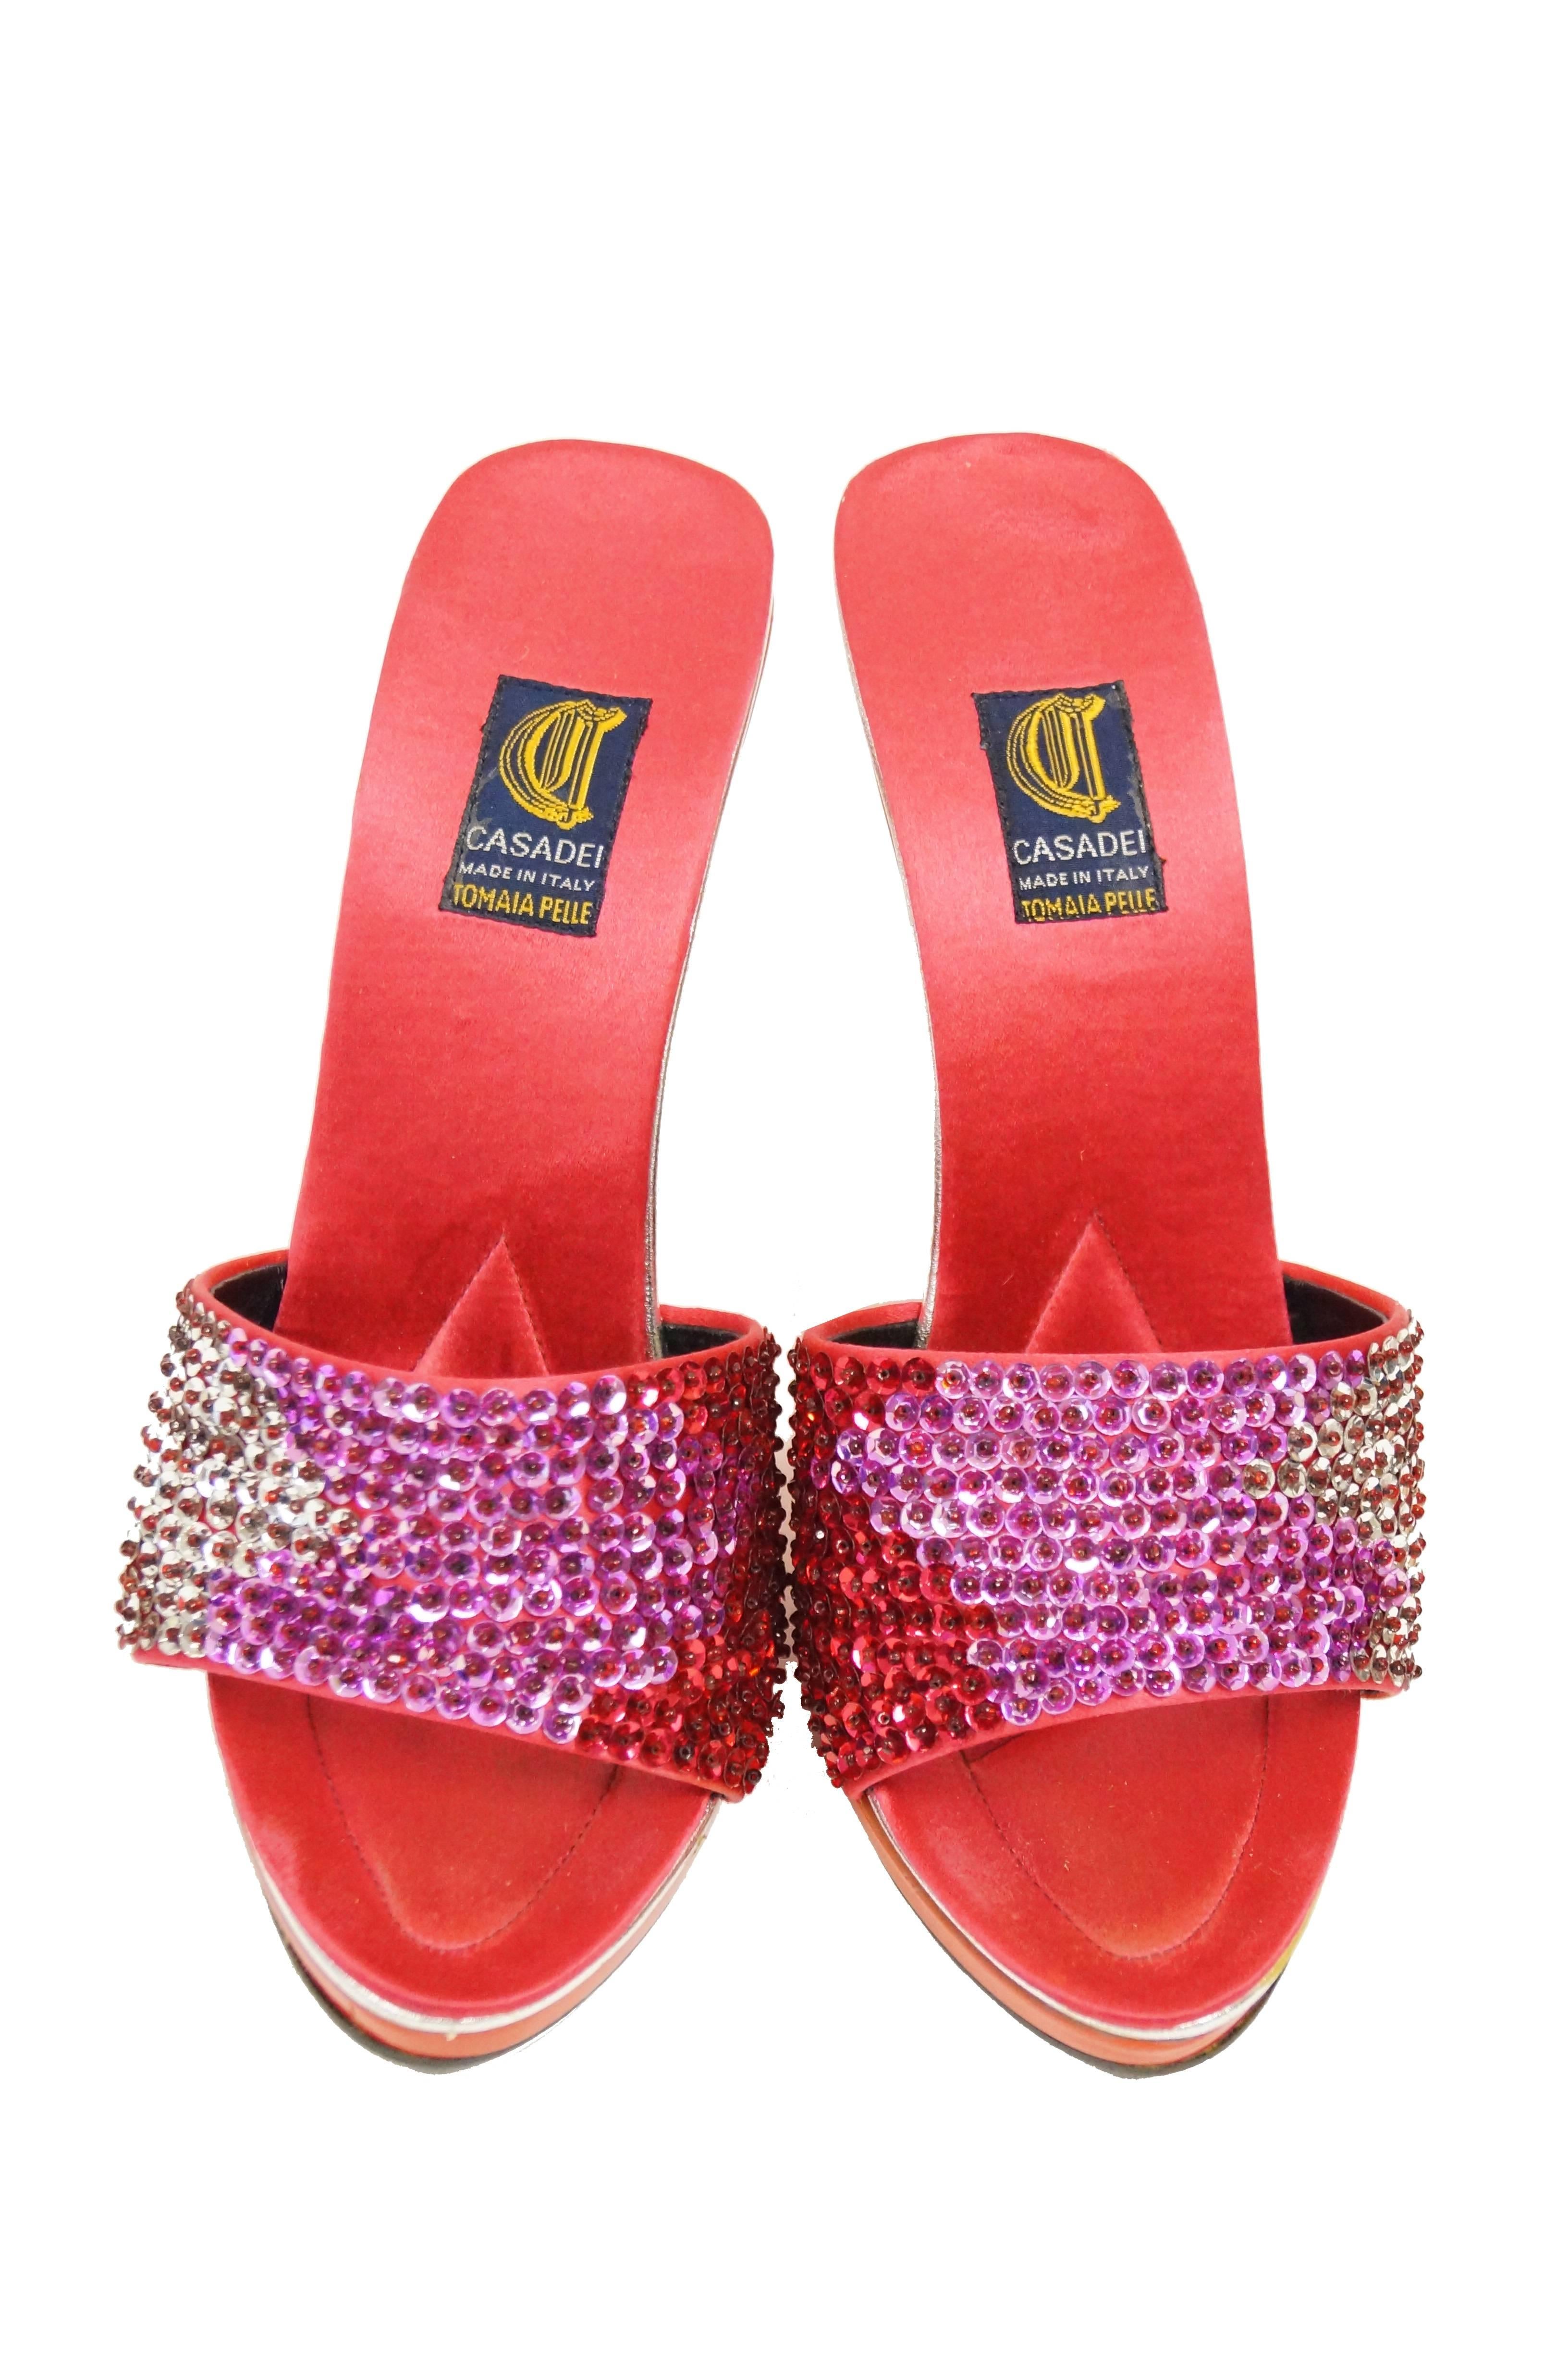 Criss-cross open back sandals by Casadei! The sandals feature thick red satin straps ornamented by red - pink - silver ombre sequins,  a thin, tapering heel in glossy red, and a peep toe. Silver accent stripe running below the satin insole.